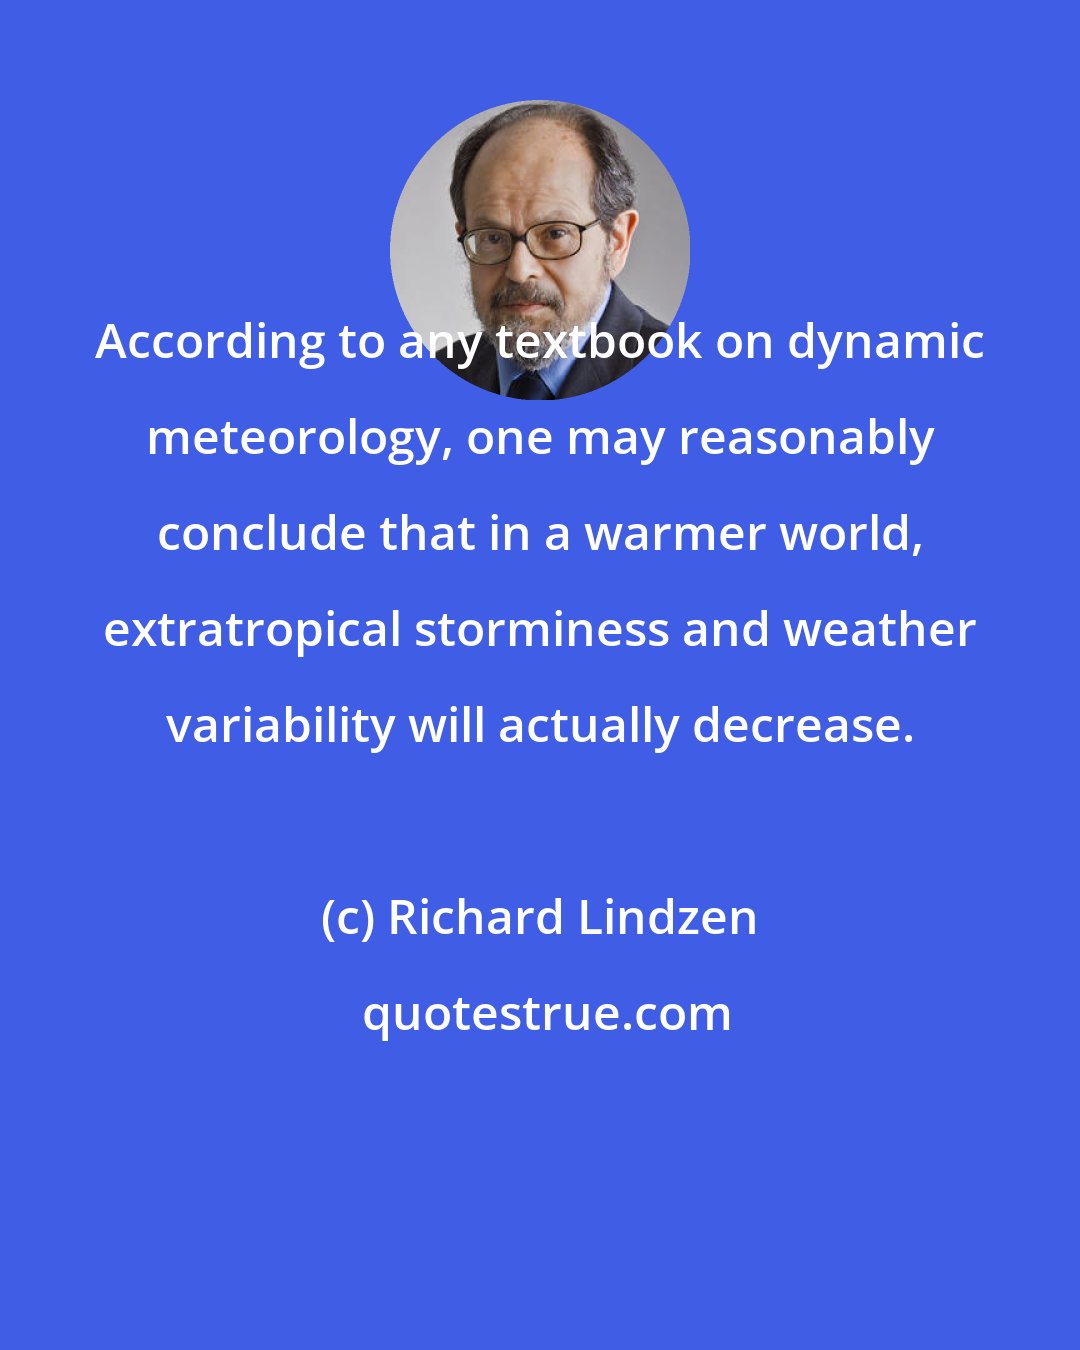 Richard Lindzen: According to any textbook on dynamic meteorology, one may reasonably conclude that in a warmer world, extratropical storminess and weather variability will actually decrease.